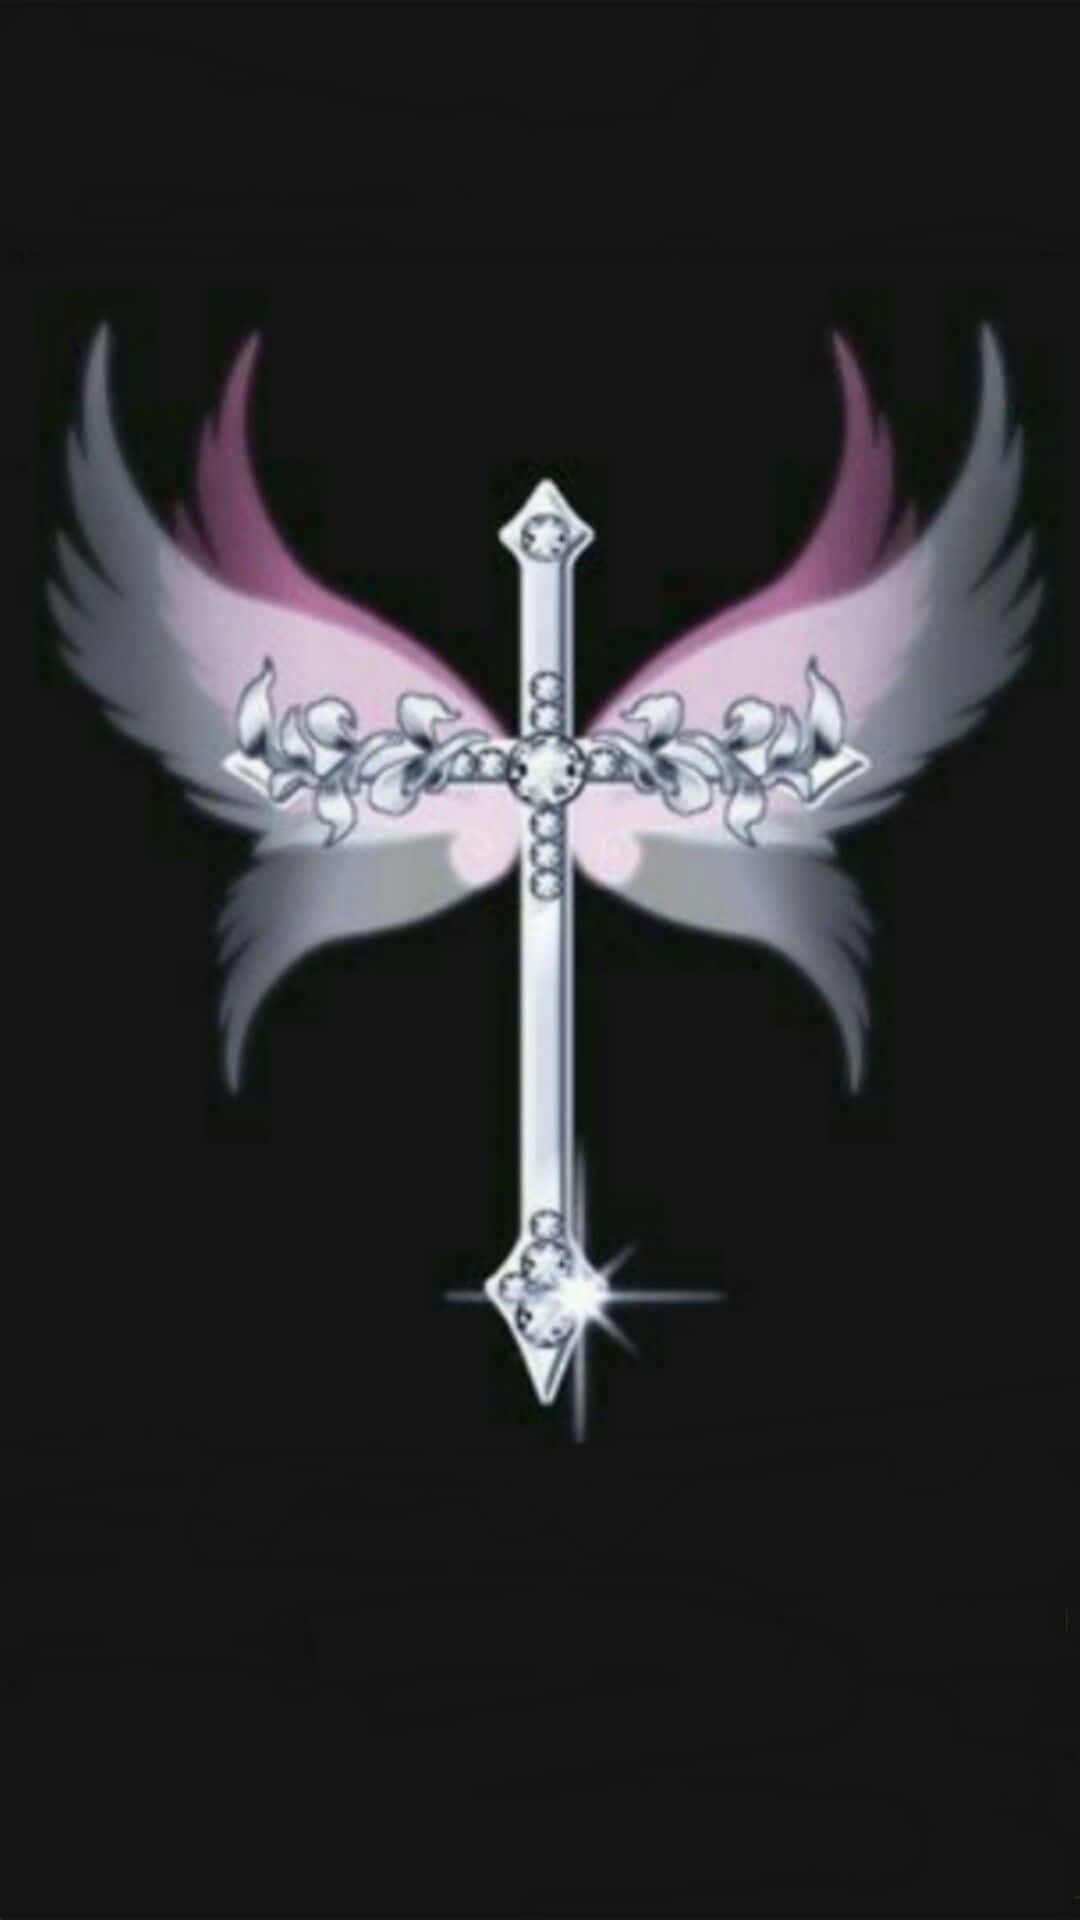 Silver Beautiful Cross With Pink Wings Wallpaper